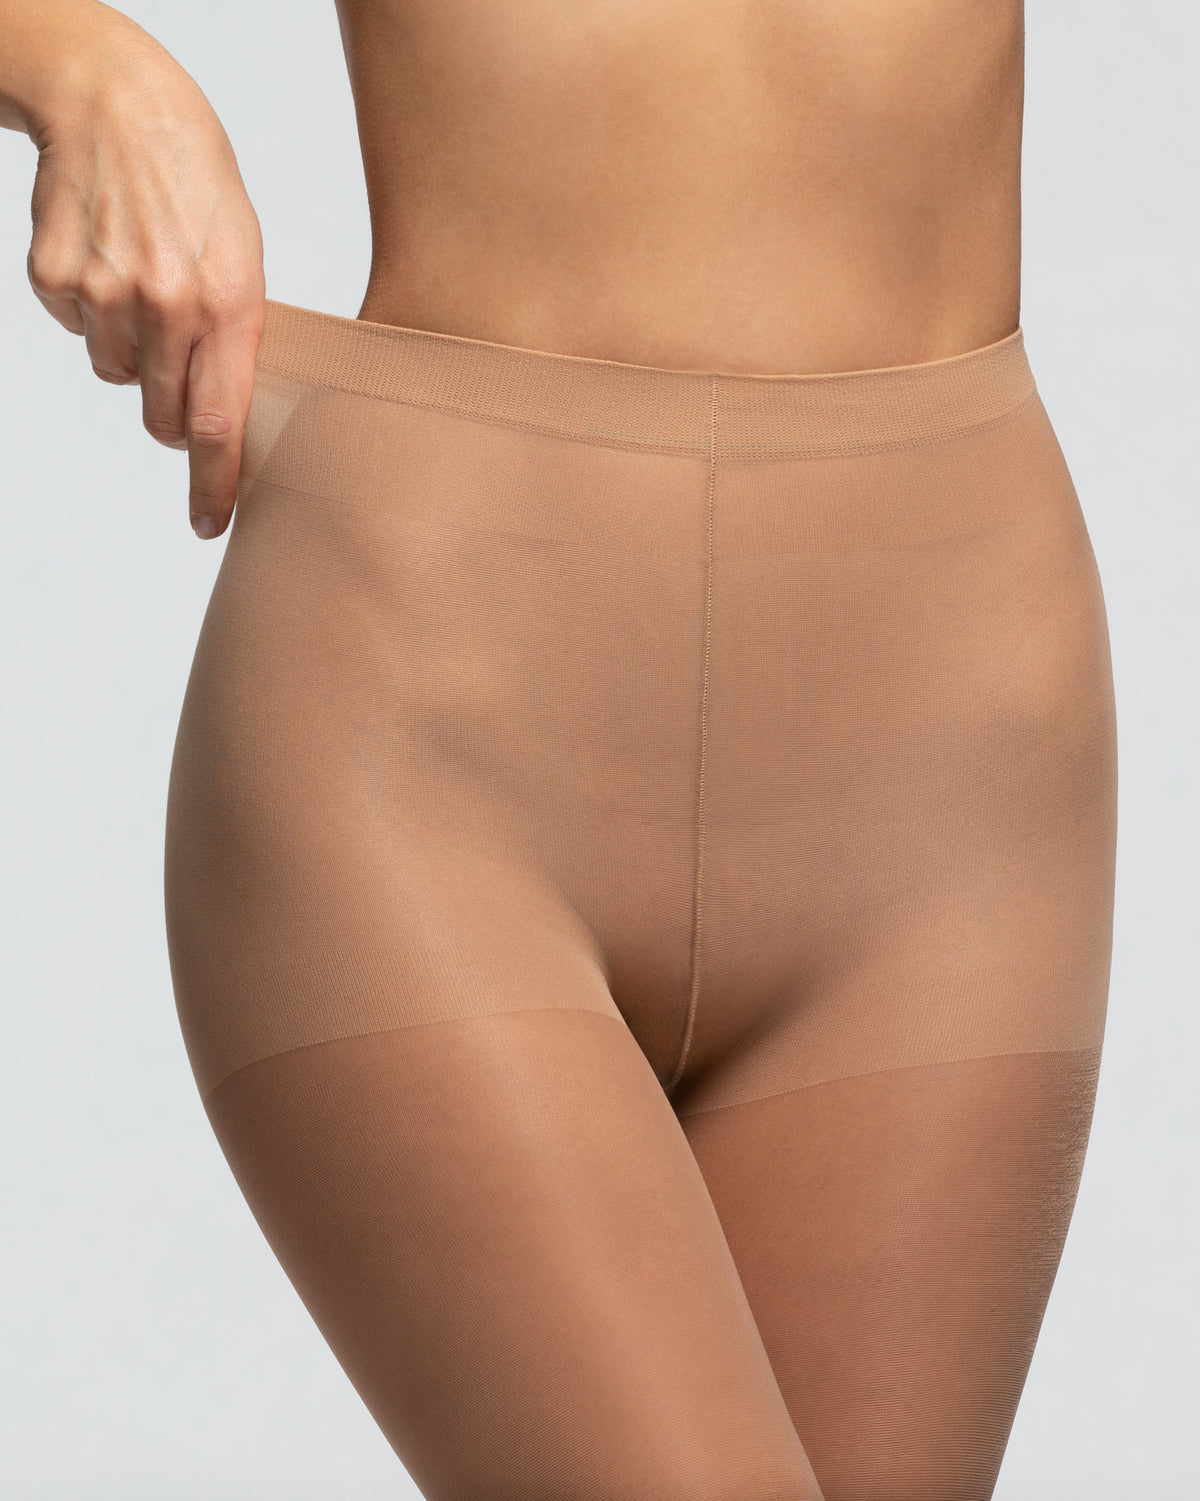 Discover the Goldie Women's Seamless Tights from Gold's Gym Apparel